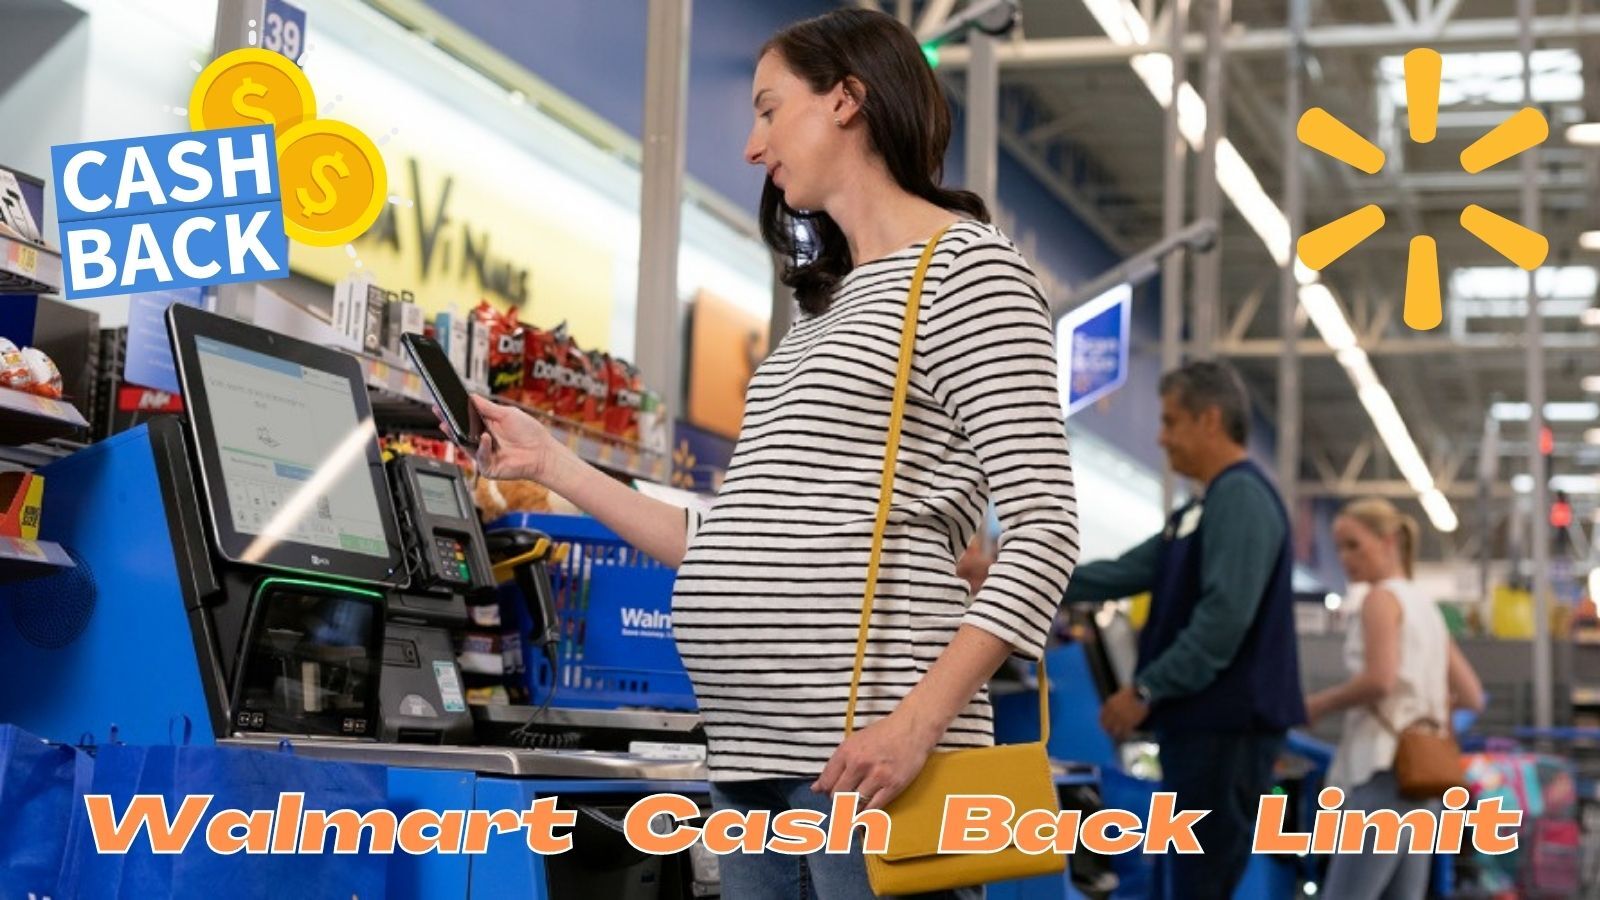 Walmart Cash Back Limit in 2022: How Much Can You Get?